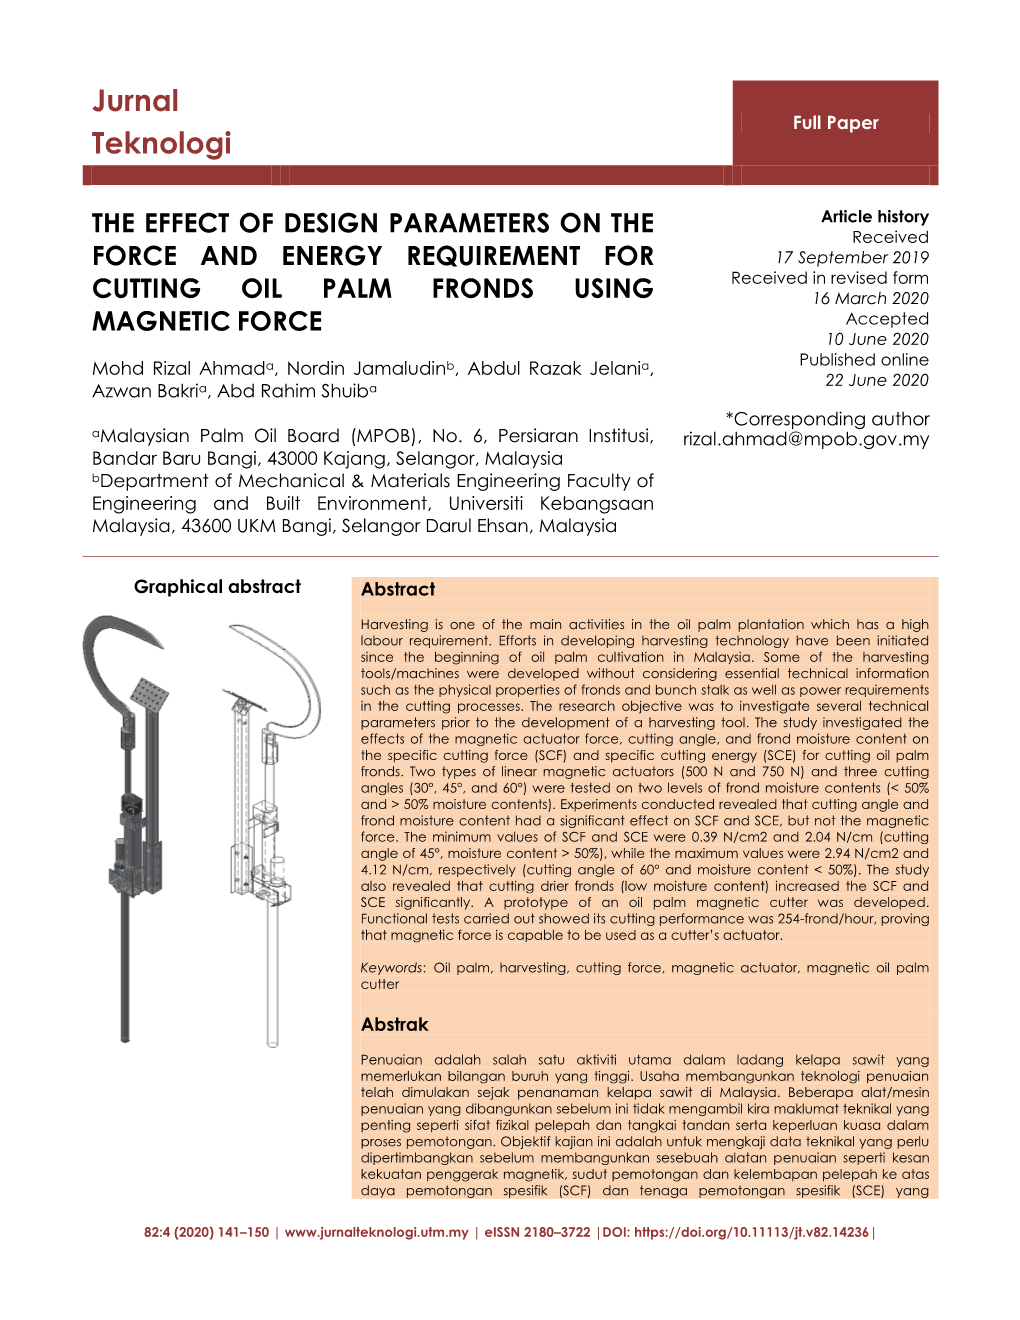 The Effect of Design Parameters on the Force and Energy